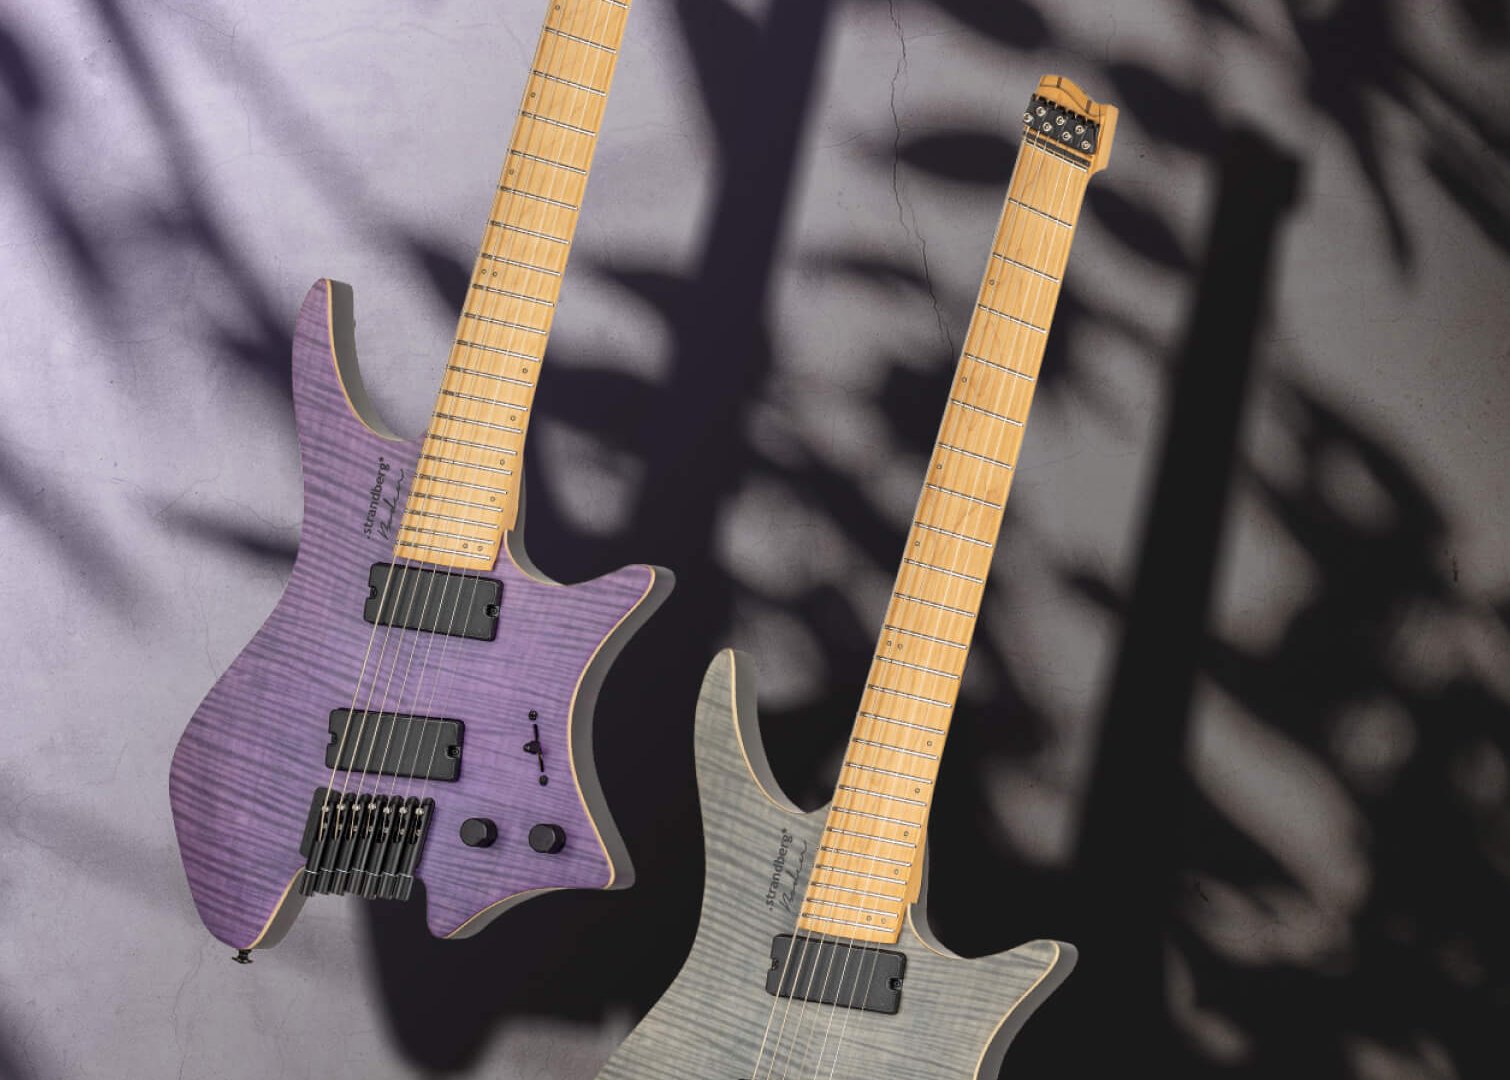 Boden standard NX purple and grey 7 strings